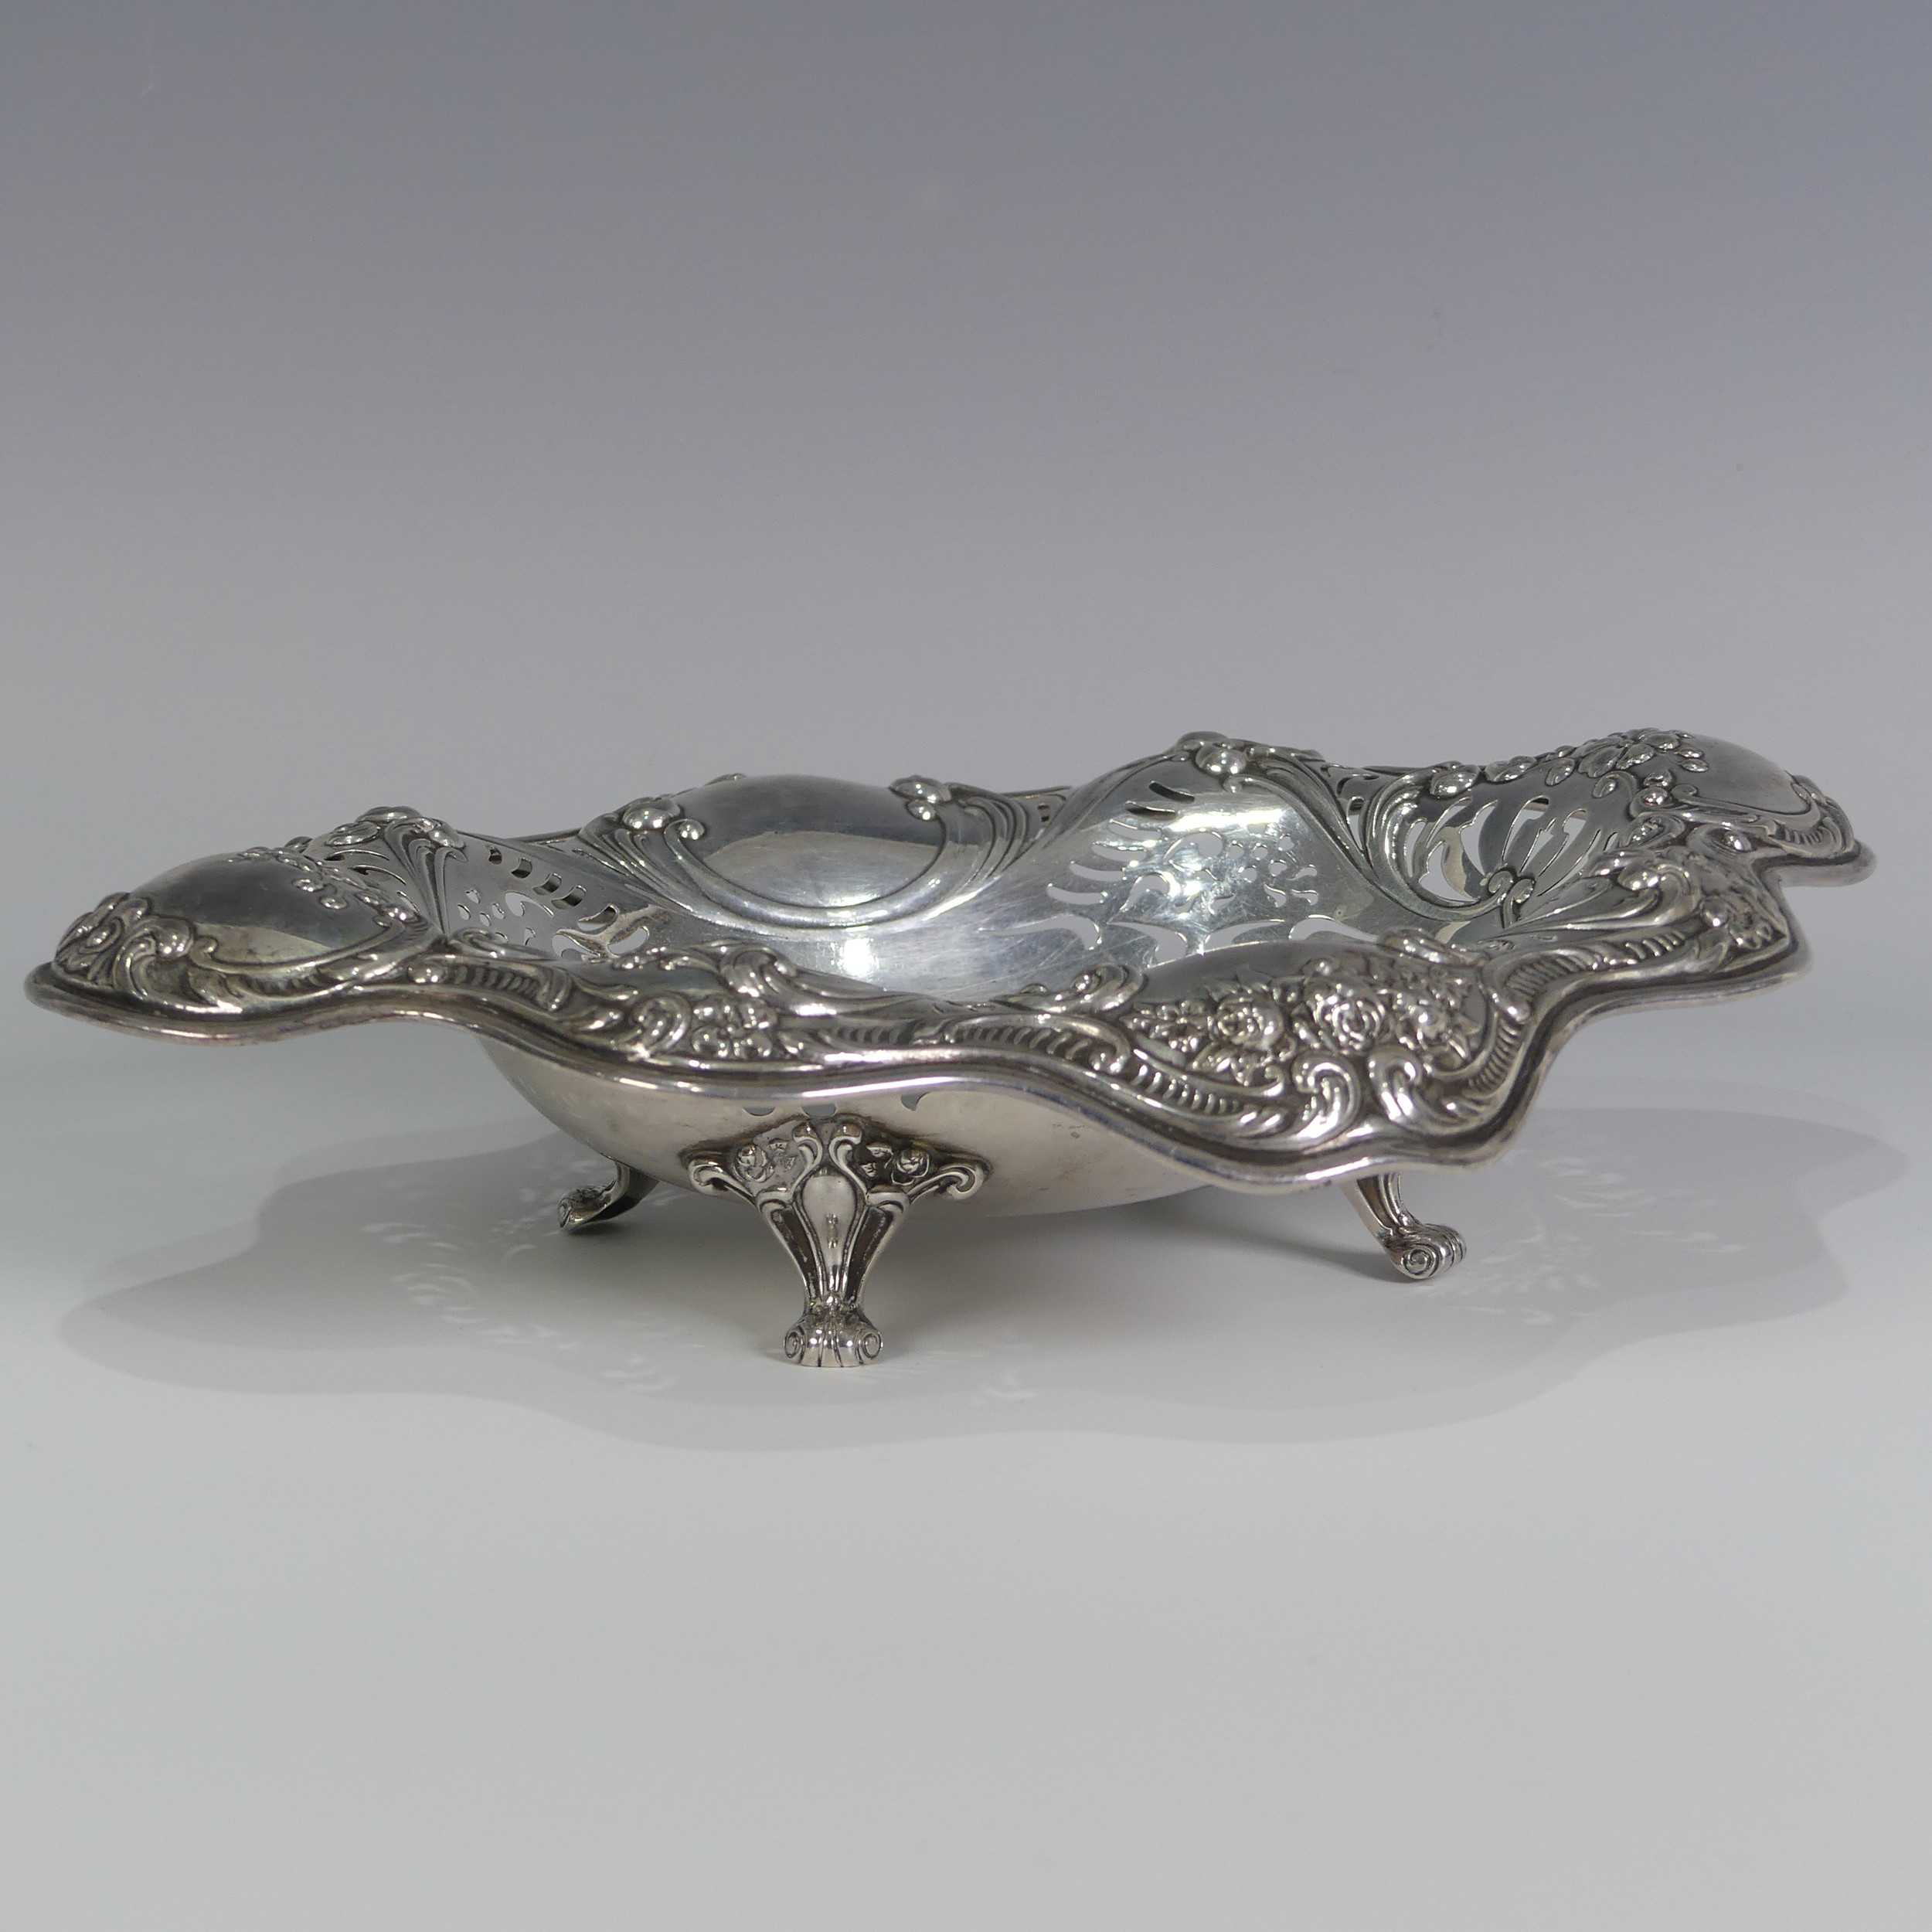 An American sterling silver Bon Bon Dish, by Gorham, design no A294, of lozenge form with pierced